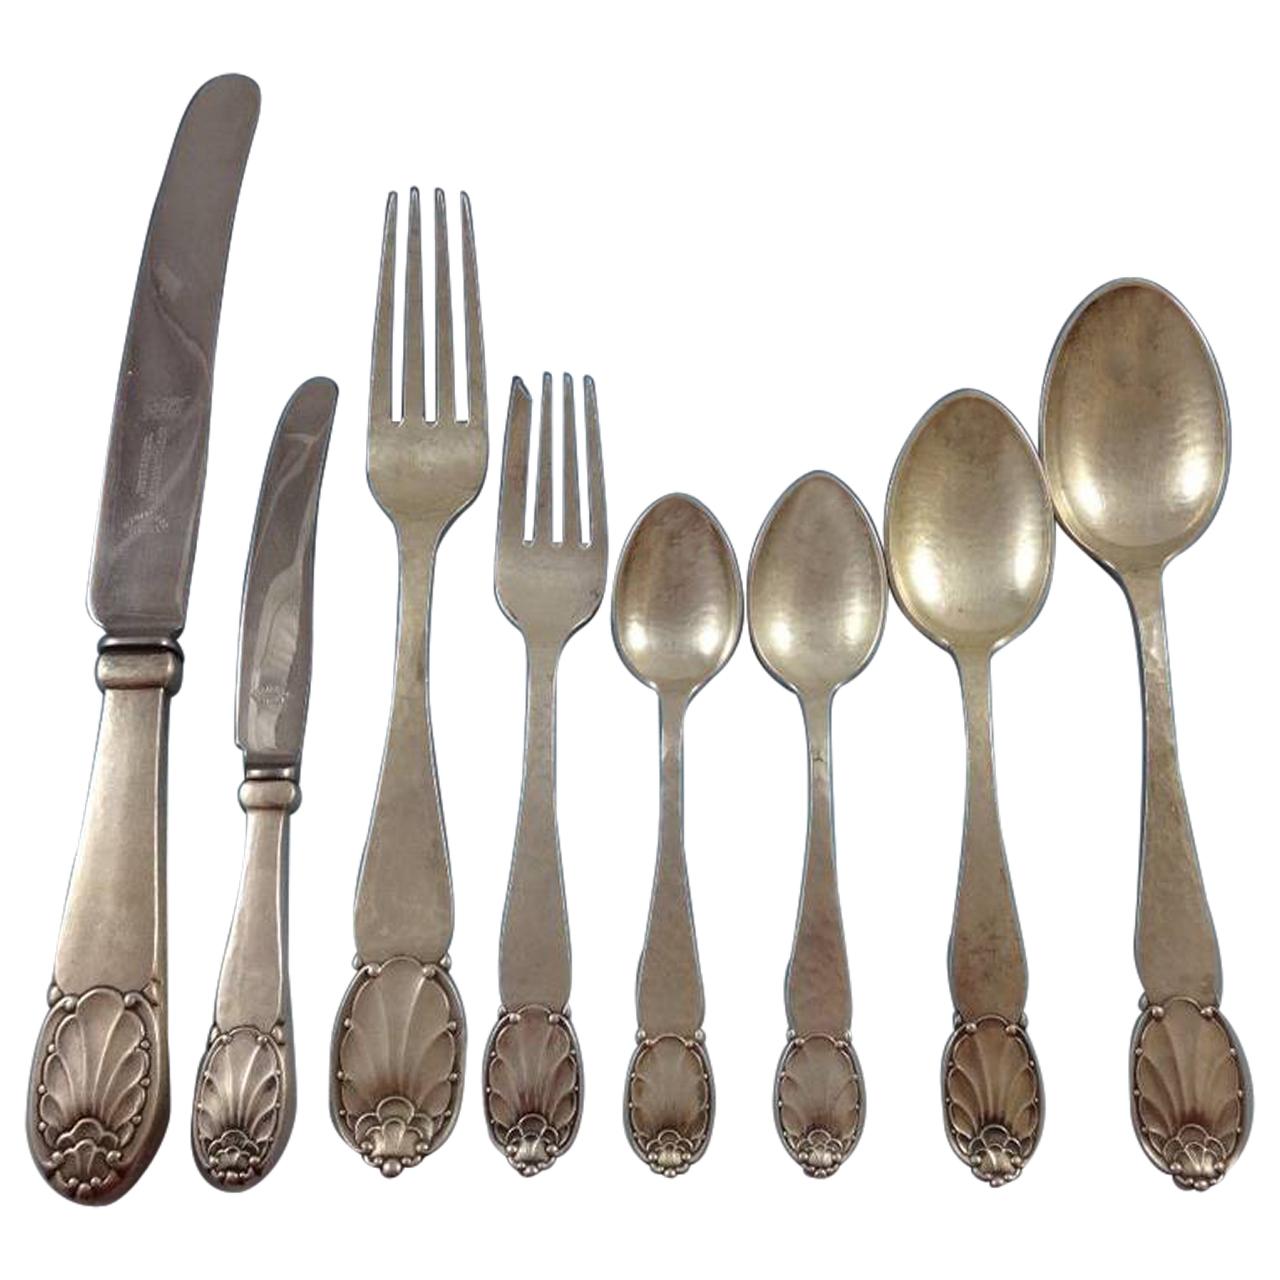 "Danish" by Christian Heise Silver Dinner Flatware Set of 106 Handmade Pieces